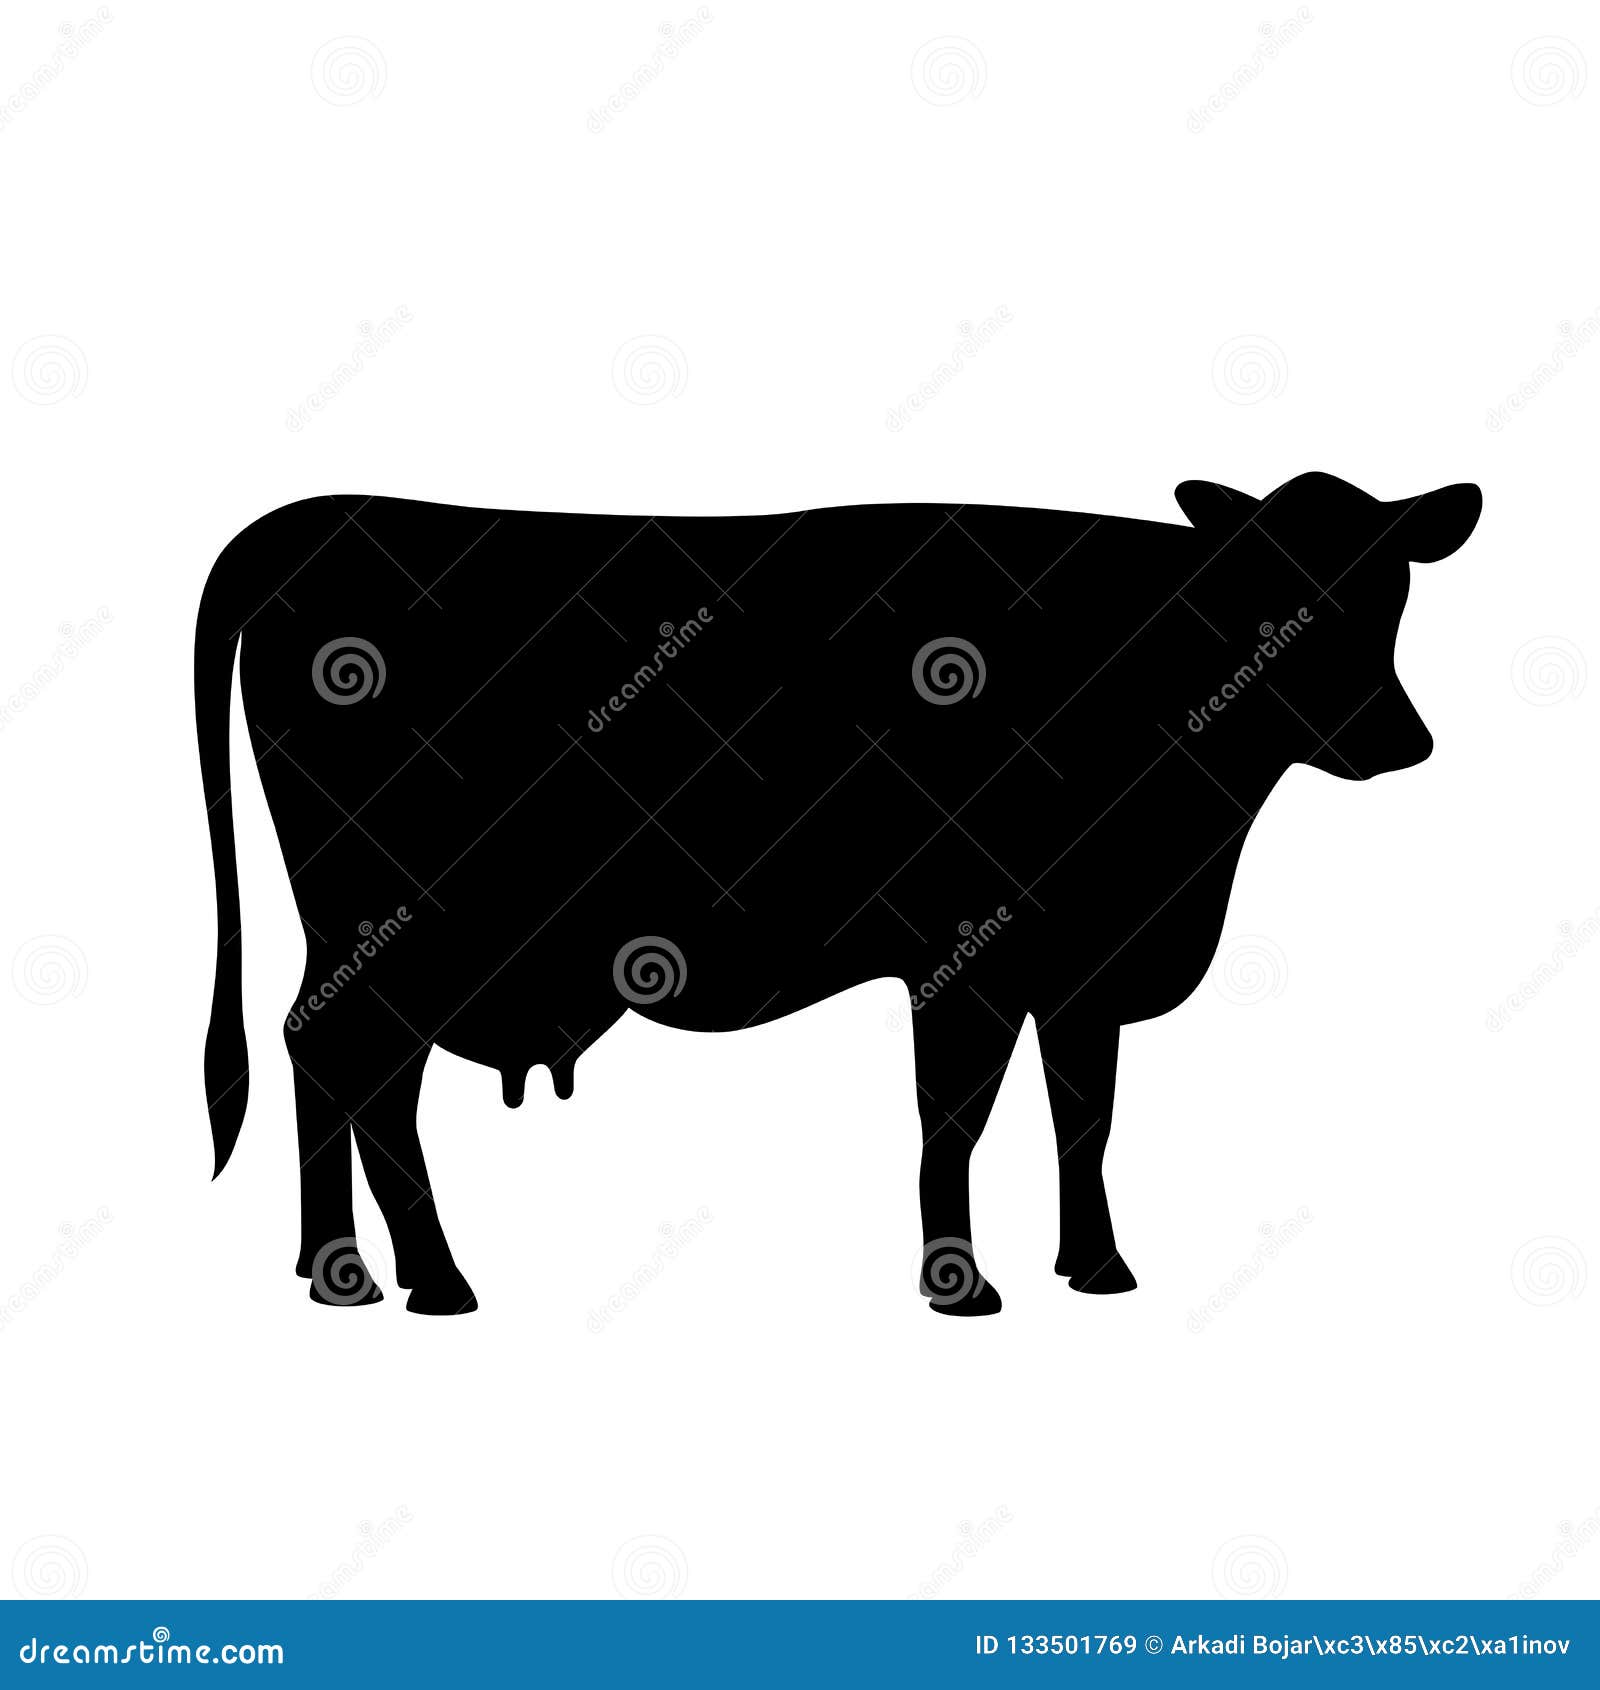 cow silhouette icon